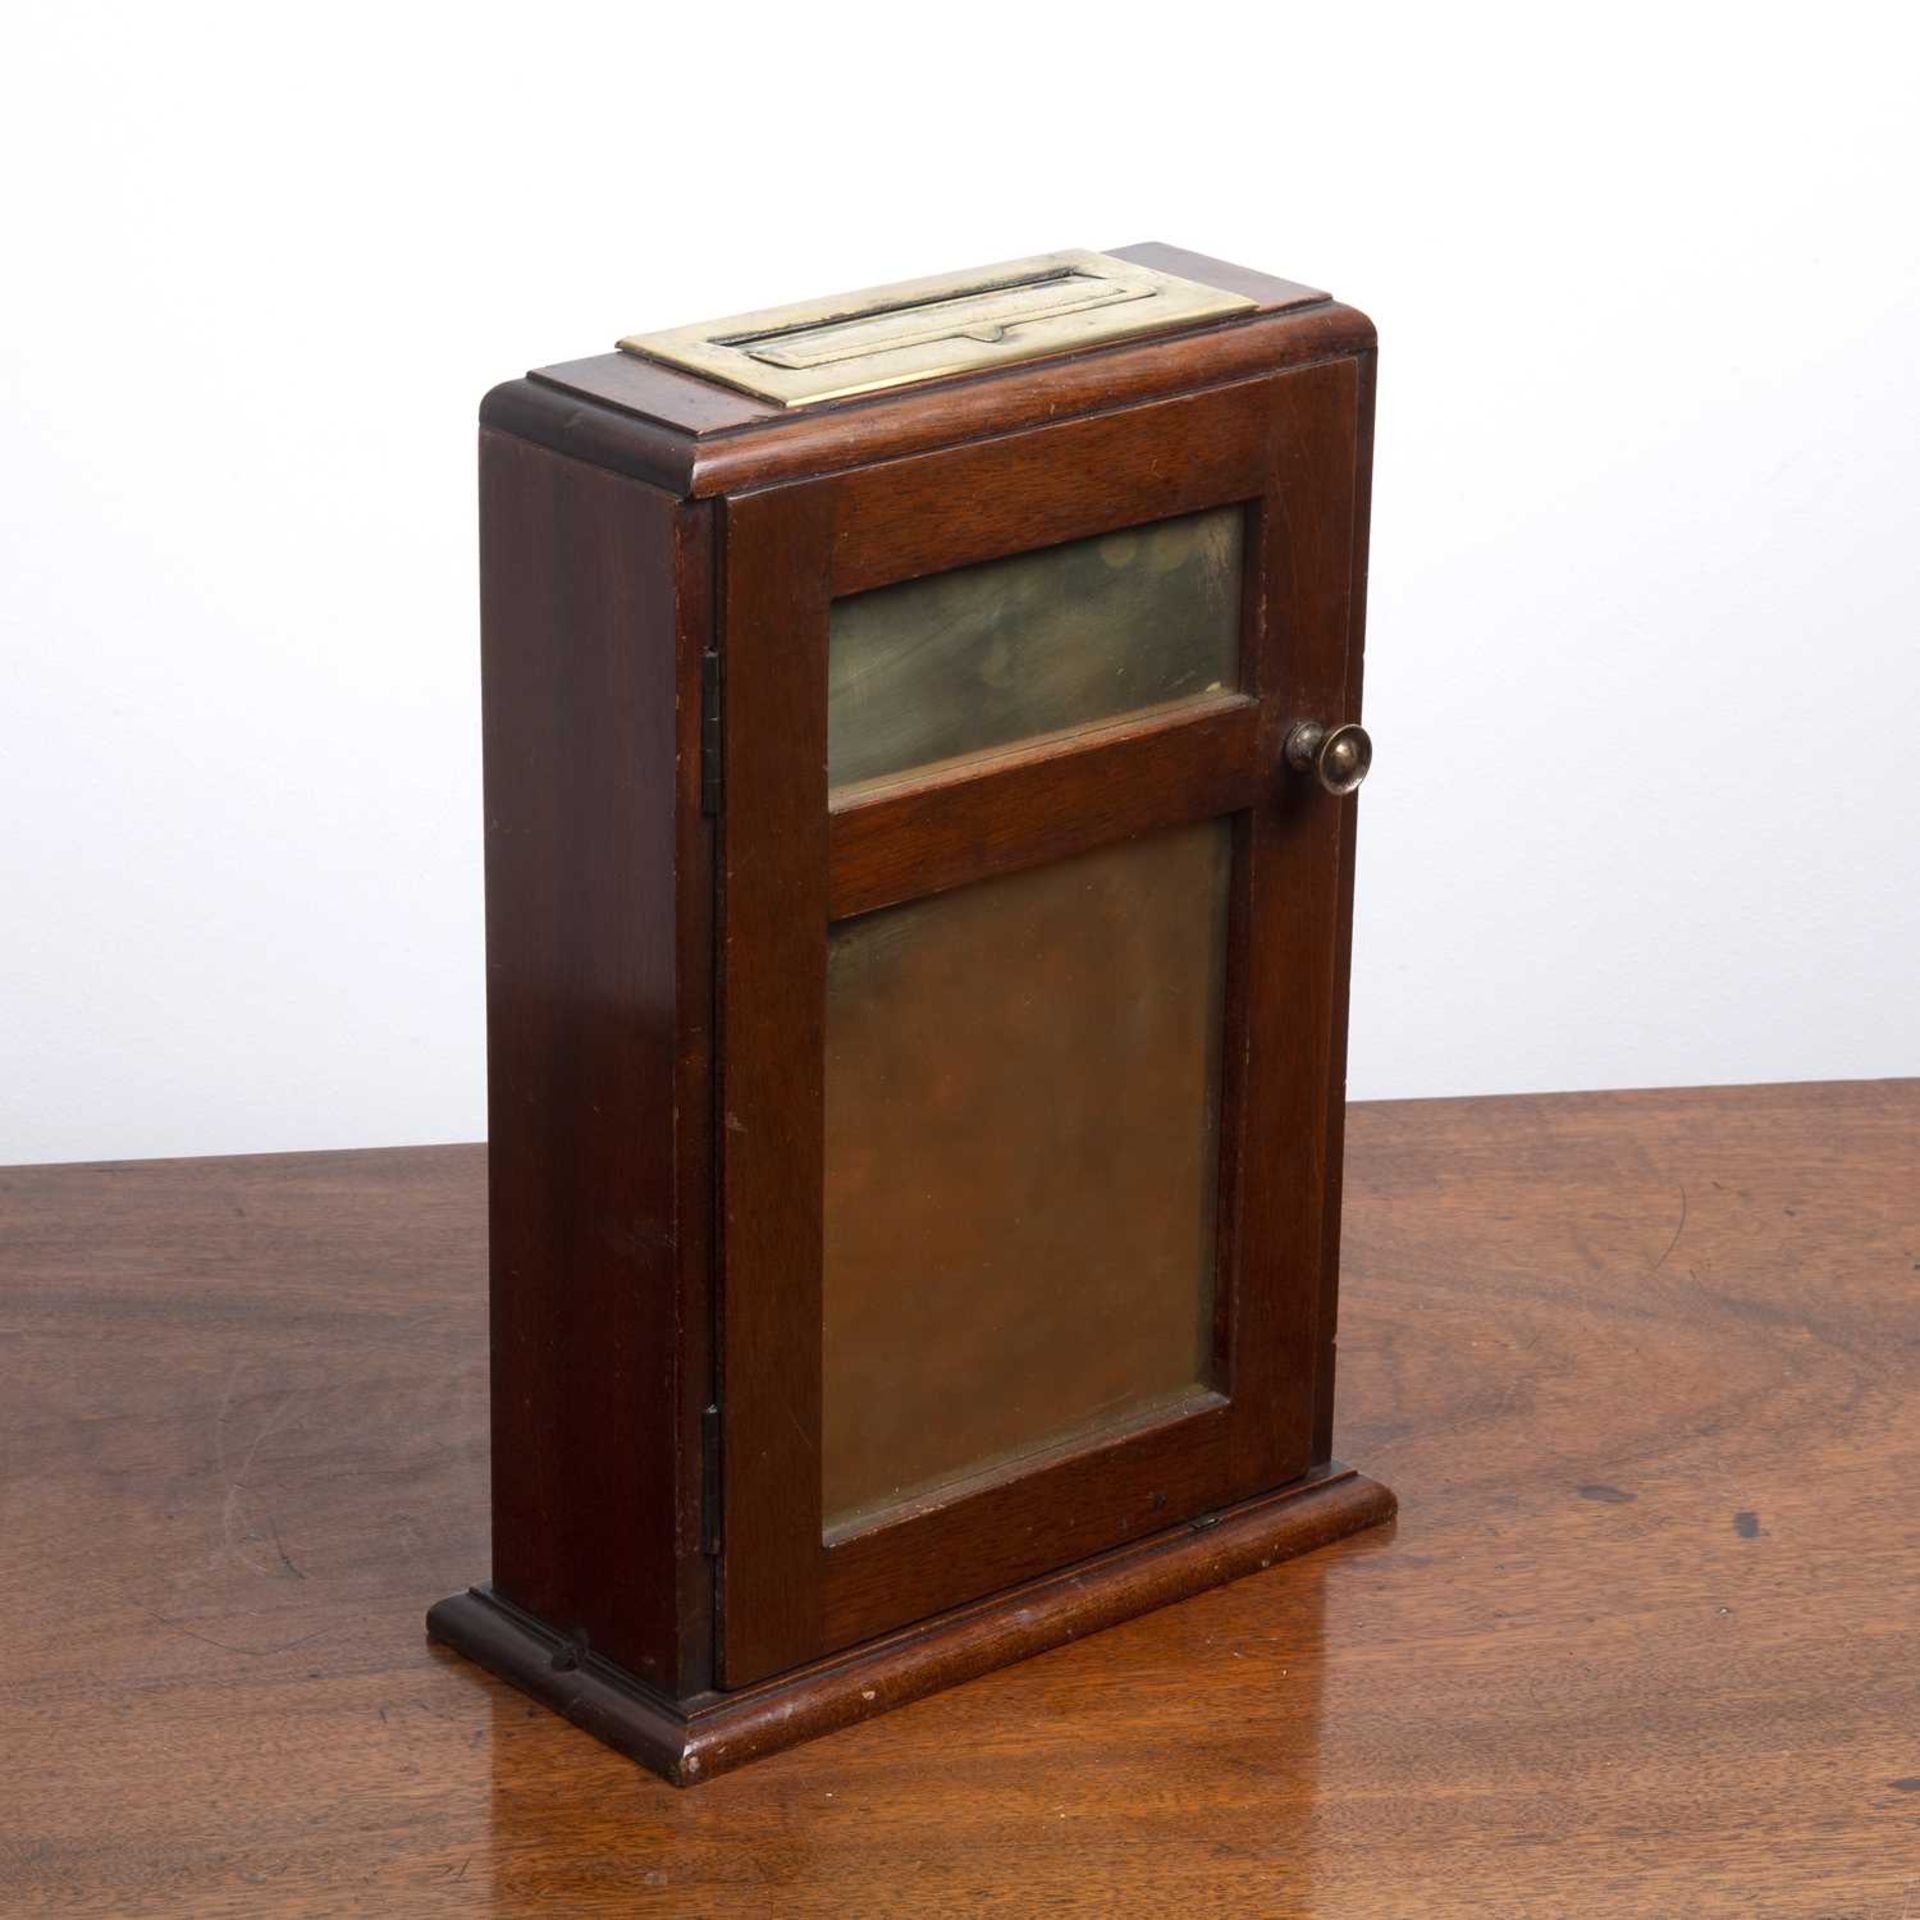 Mahogany and brass fronted ballot/vote box late 19th/early 20th Century, 25cm wide x 34cm high x